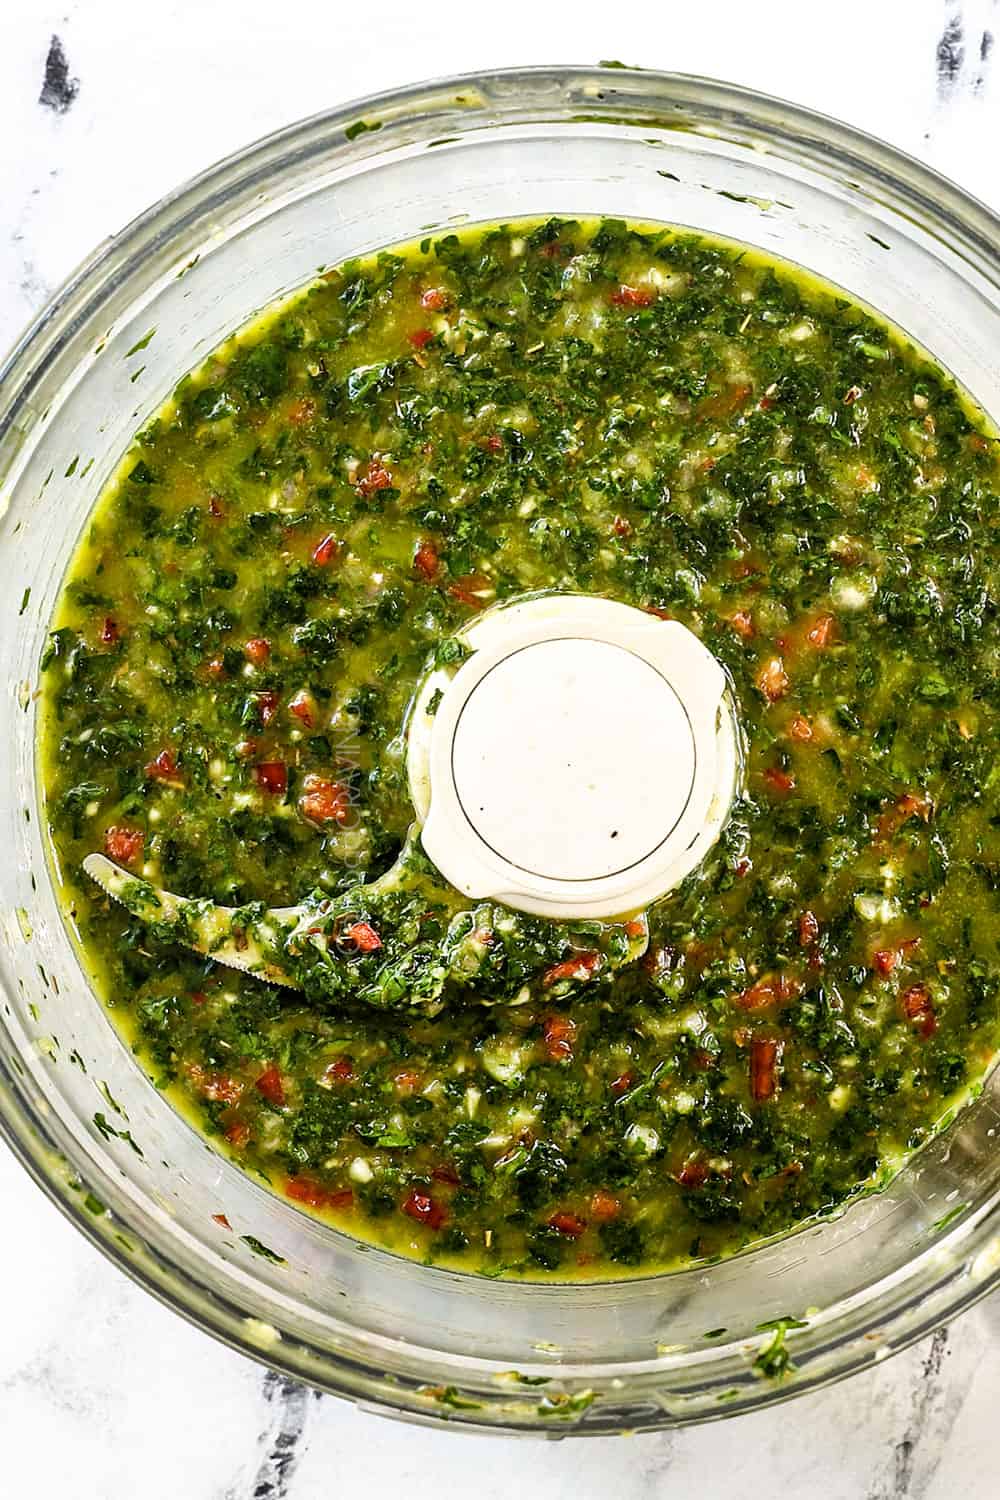 showing how to make best chimichurri sauce by blending in a food processor